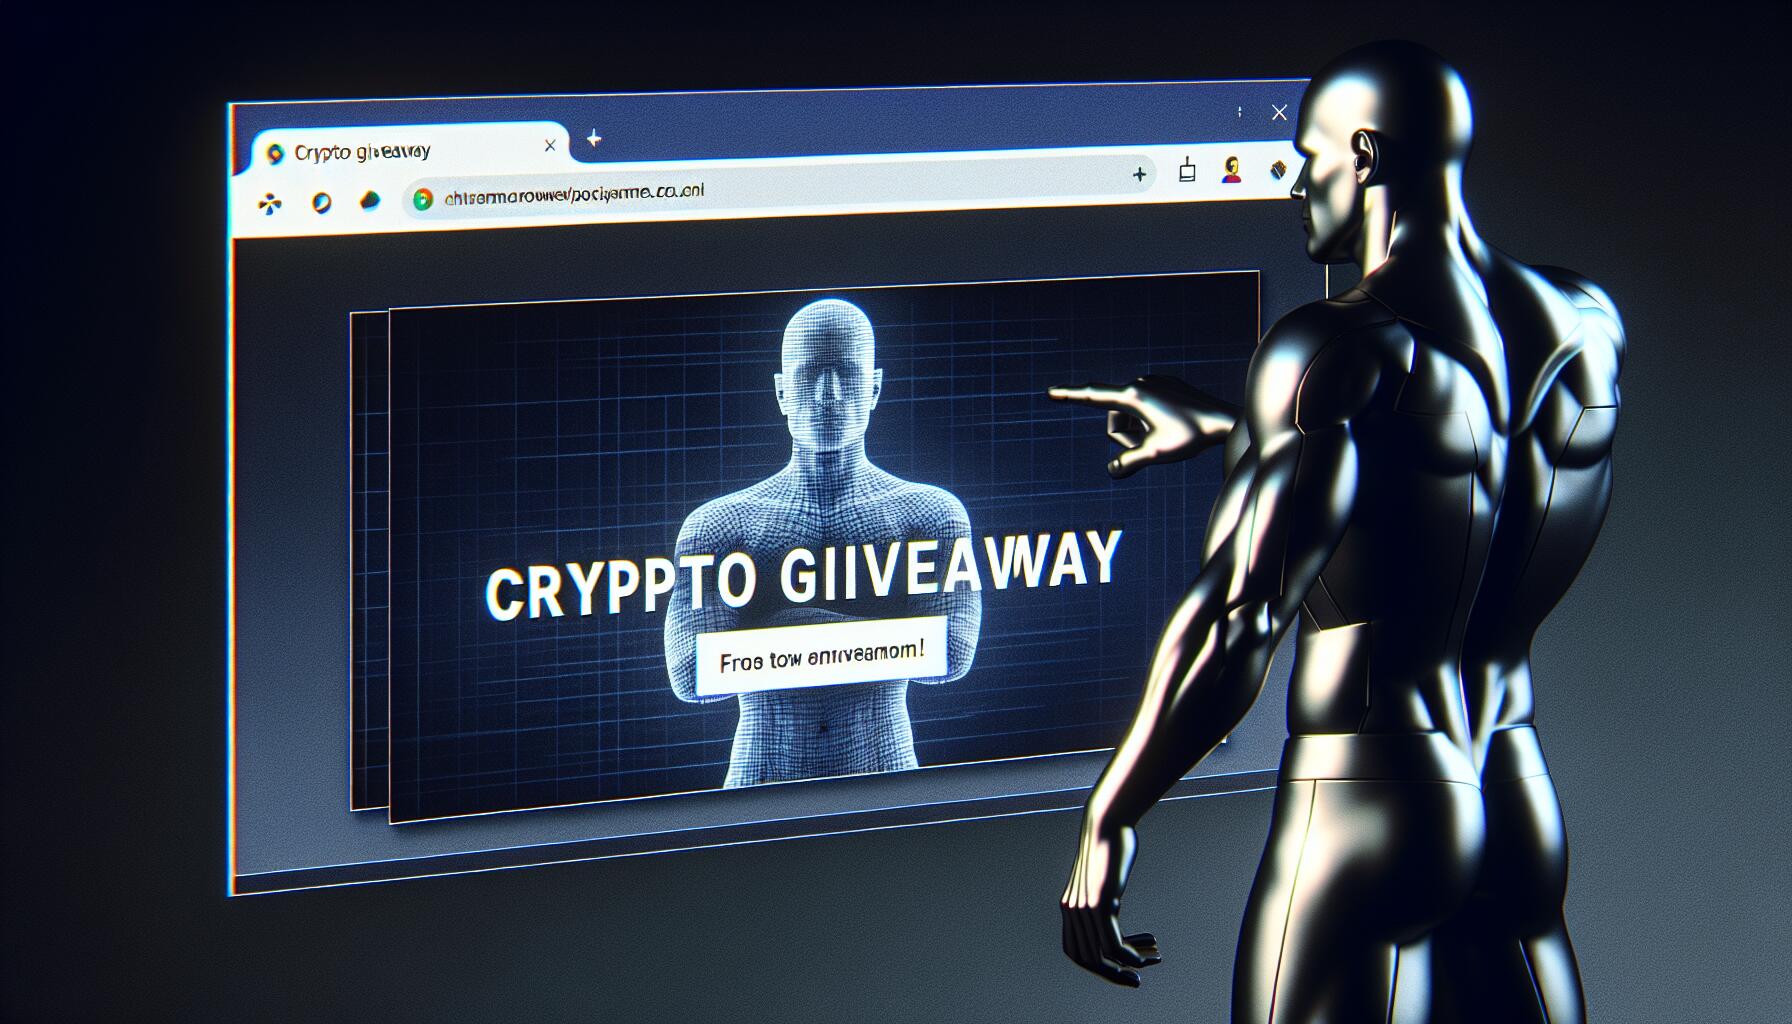 elon musk crypto giveaway ads